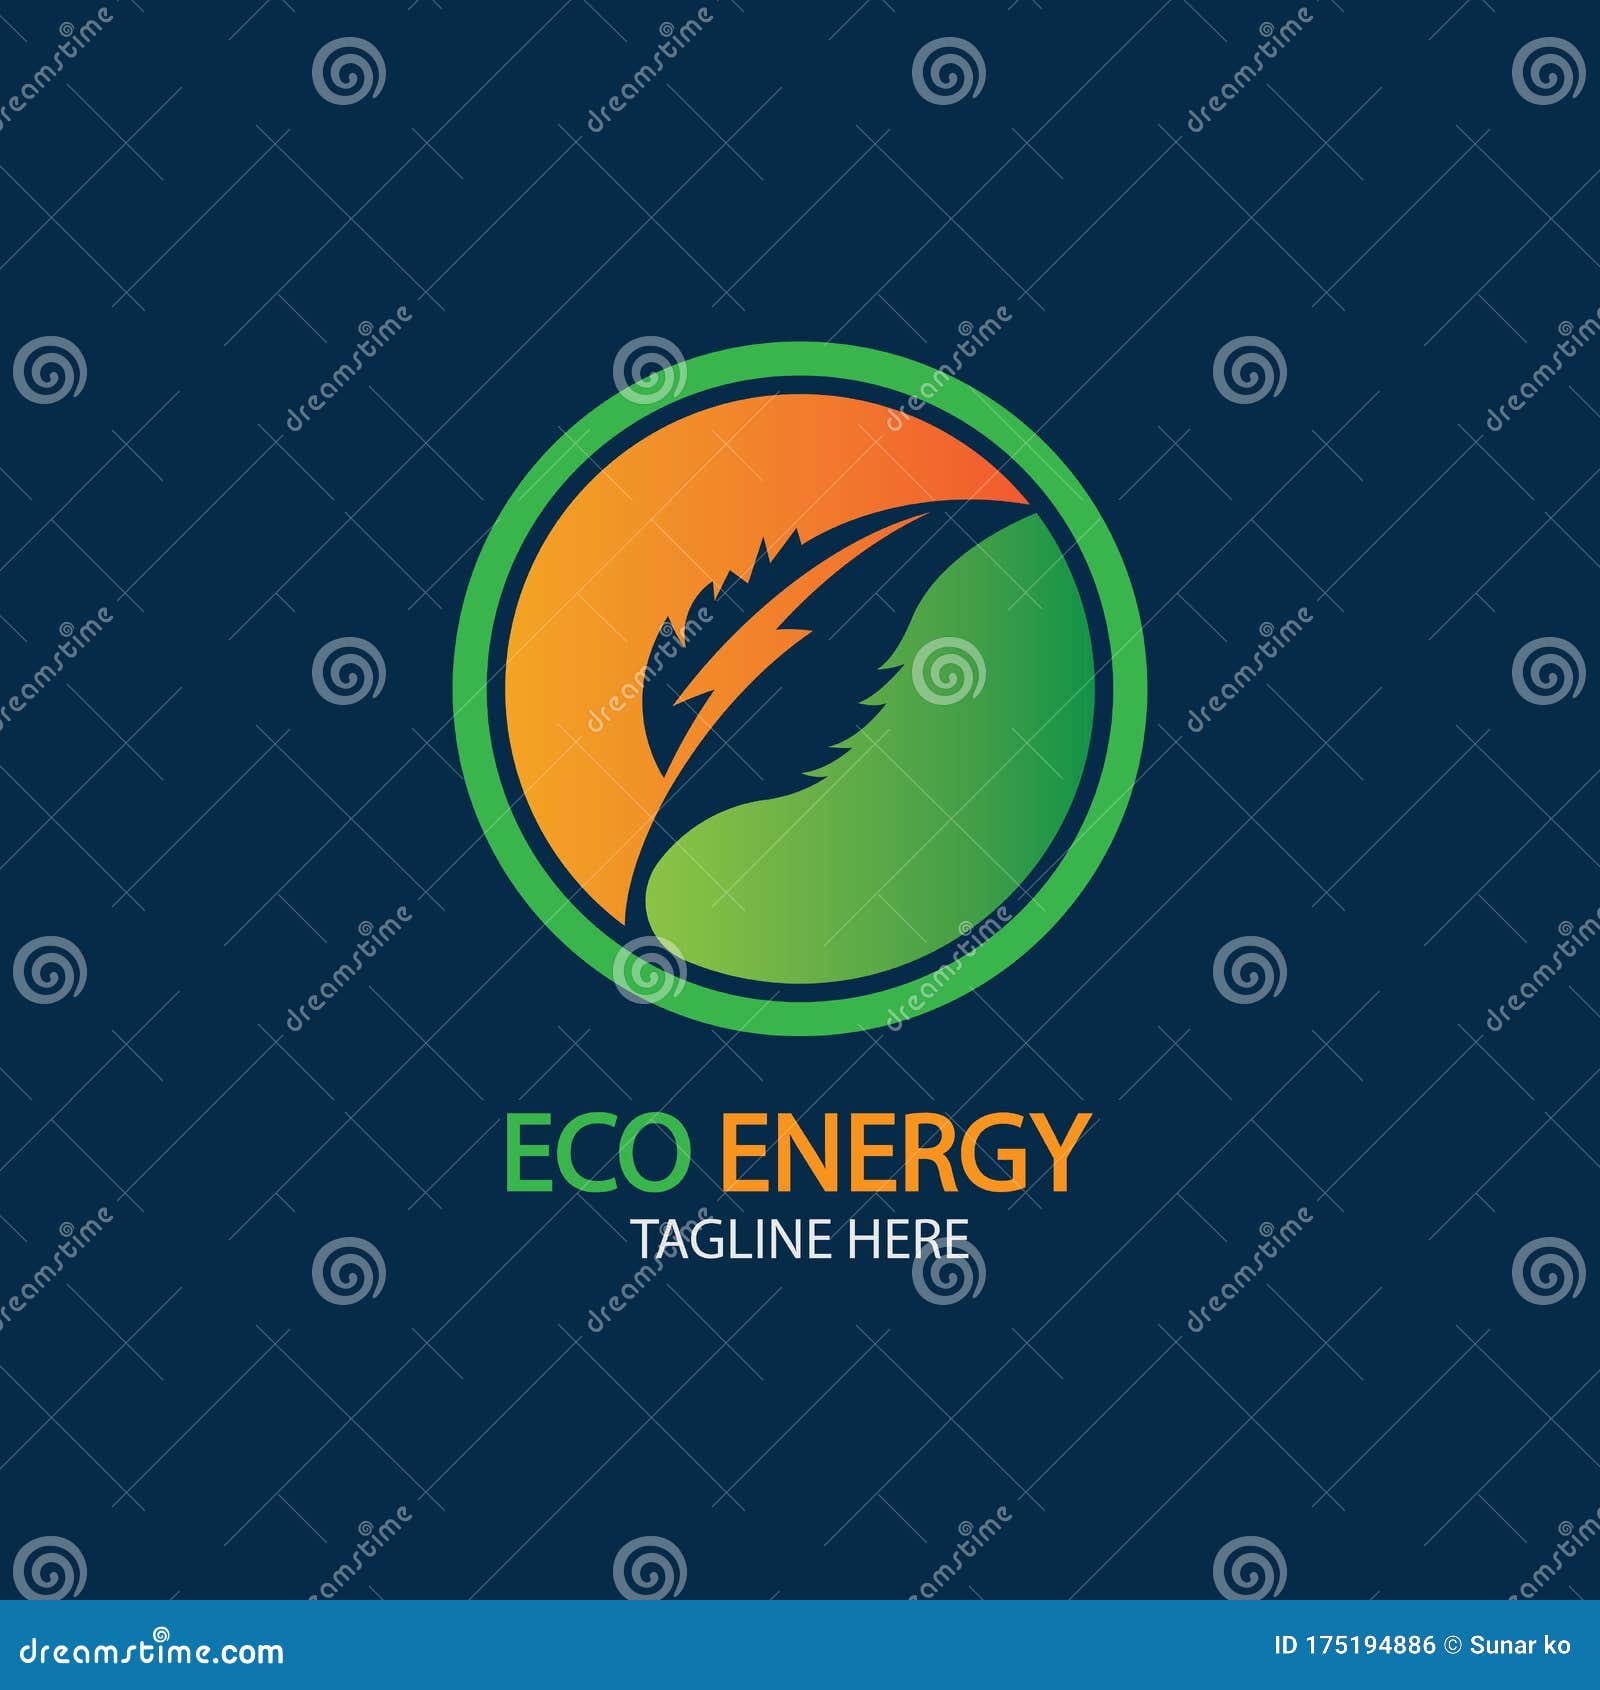 Eco Energy Vector Logo with Leaf Symbol. Green Color with Flash Thunder Graphic. Nature and Renewable. this Logo is Stock - Illustration of leaf, background: